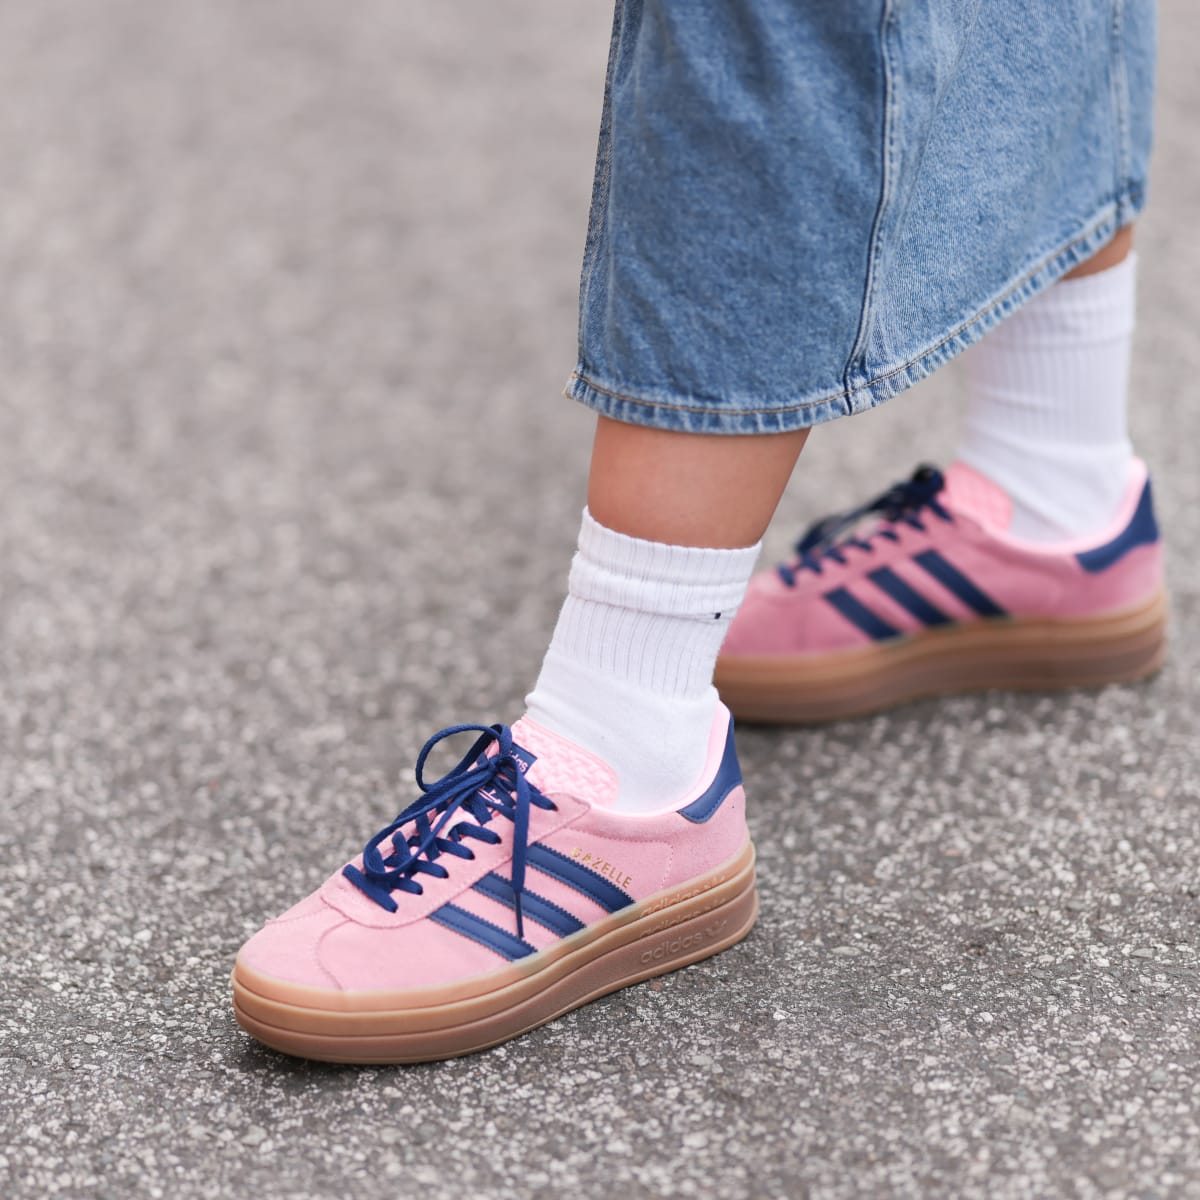 Why Stylish Women's Sneakers are a Must-Have for Every Fashionista